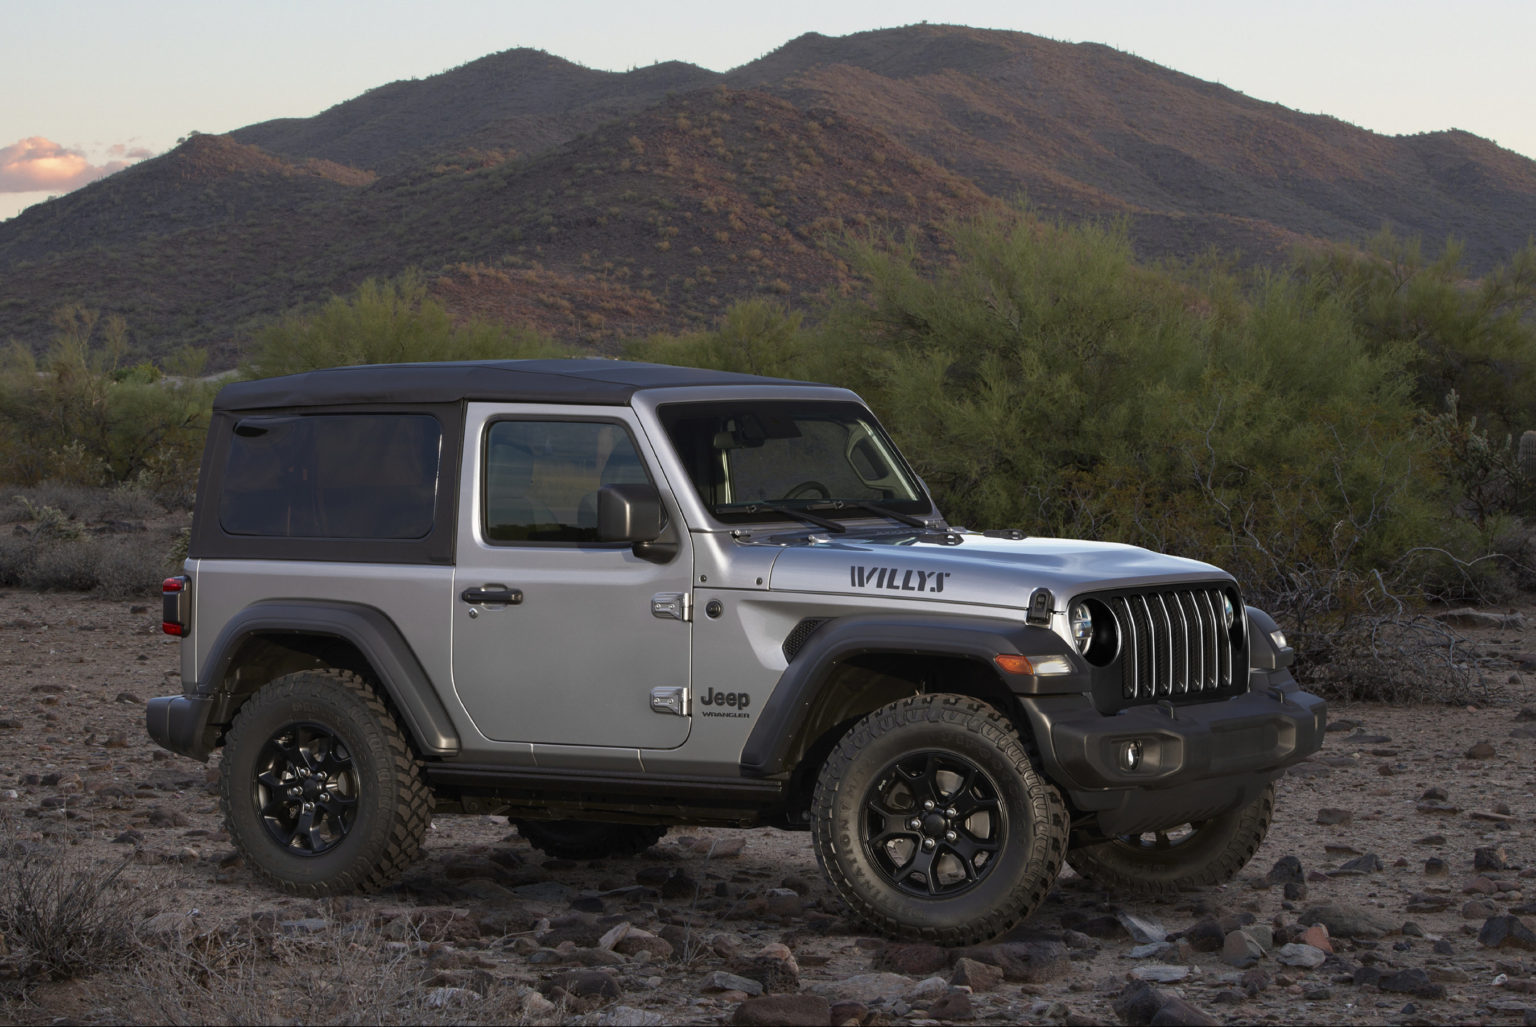 Jeep is brining back its popular Willys package for the 2020 model year Wrangler.